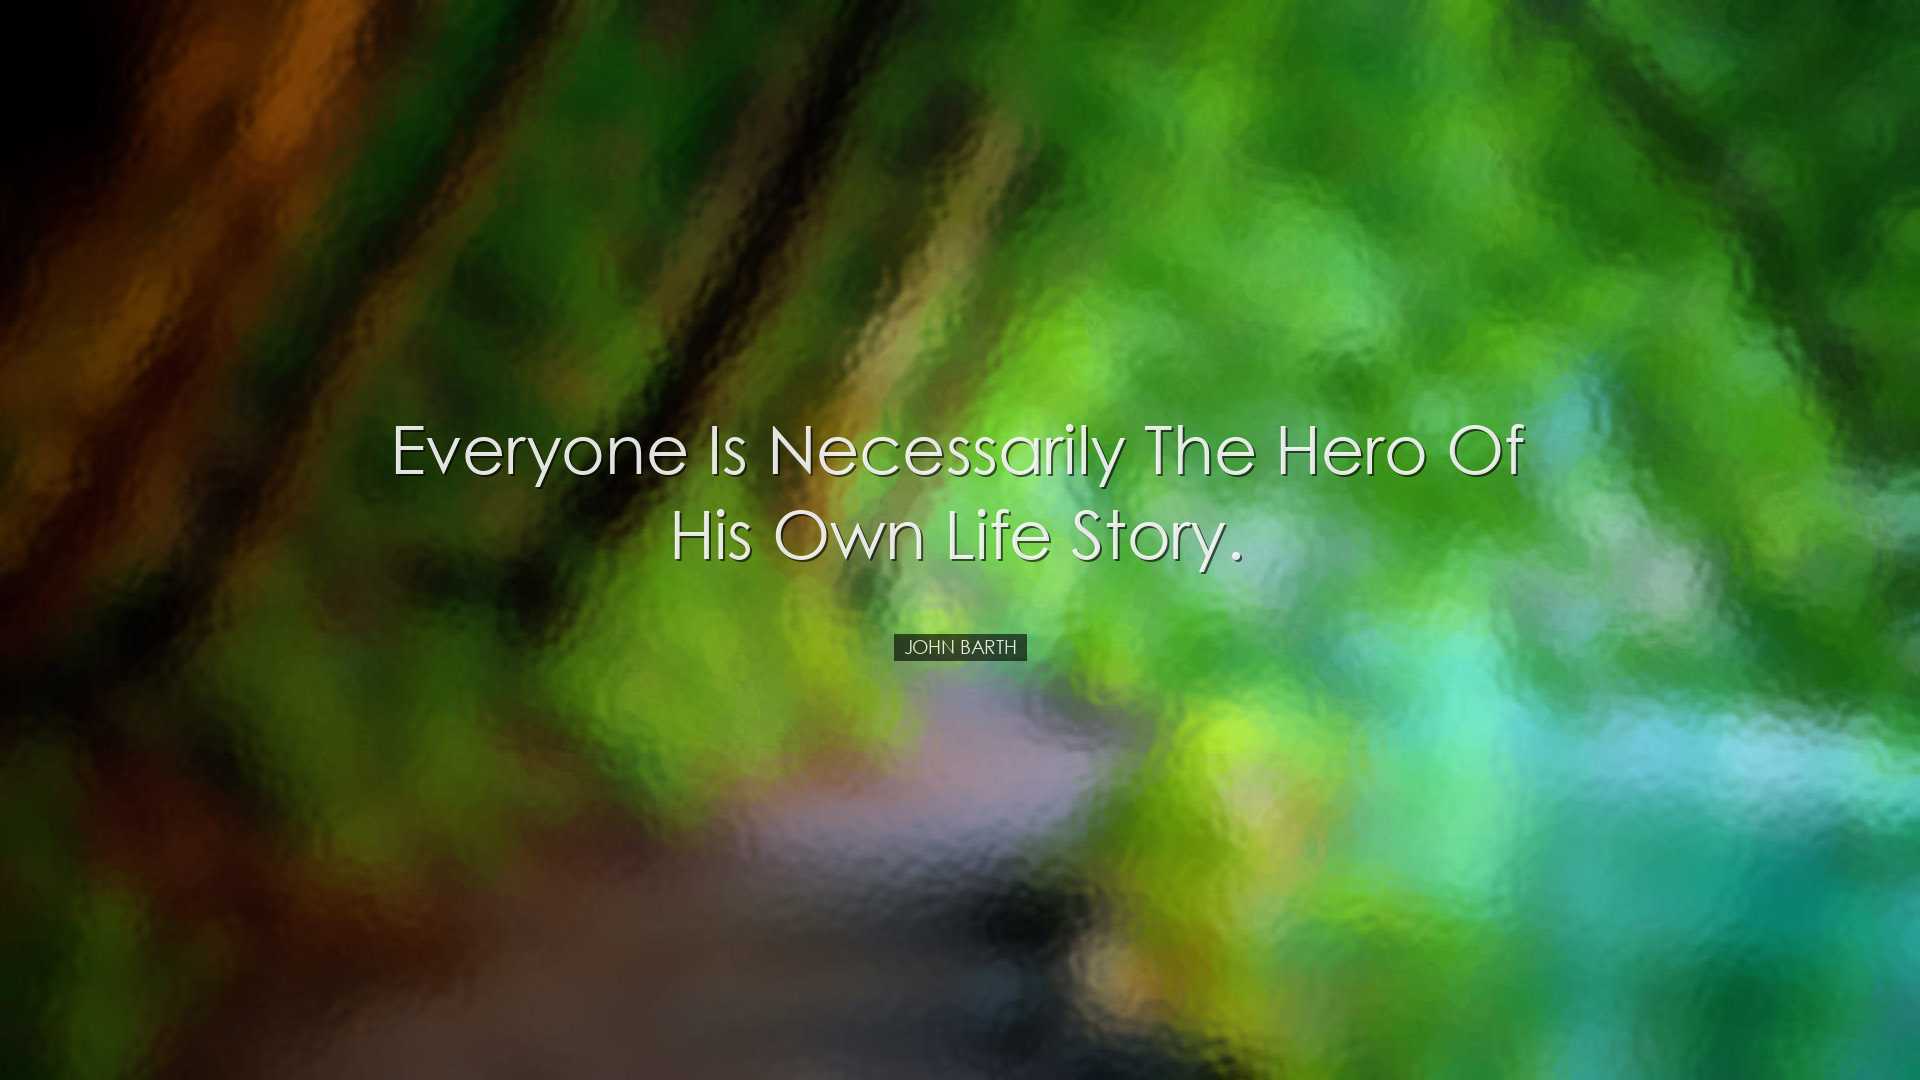 Everyone is necessarily the hero of his own life story. - John Bar